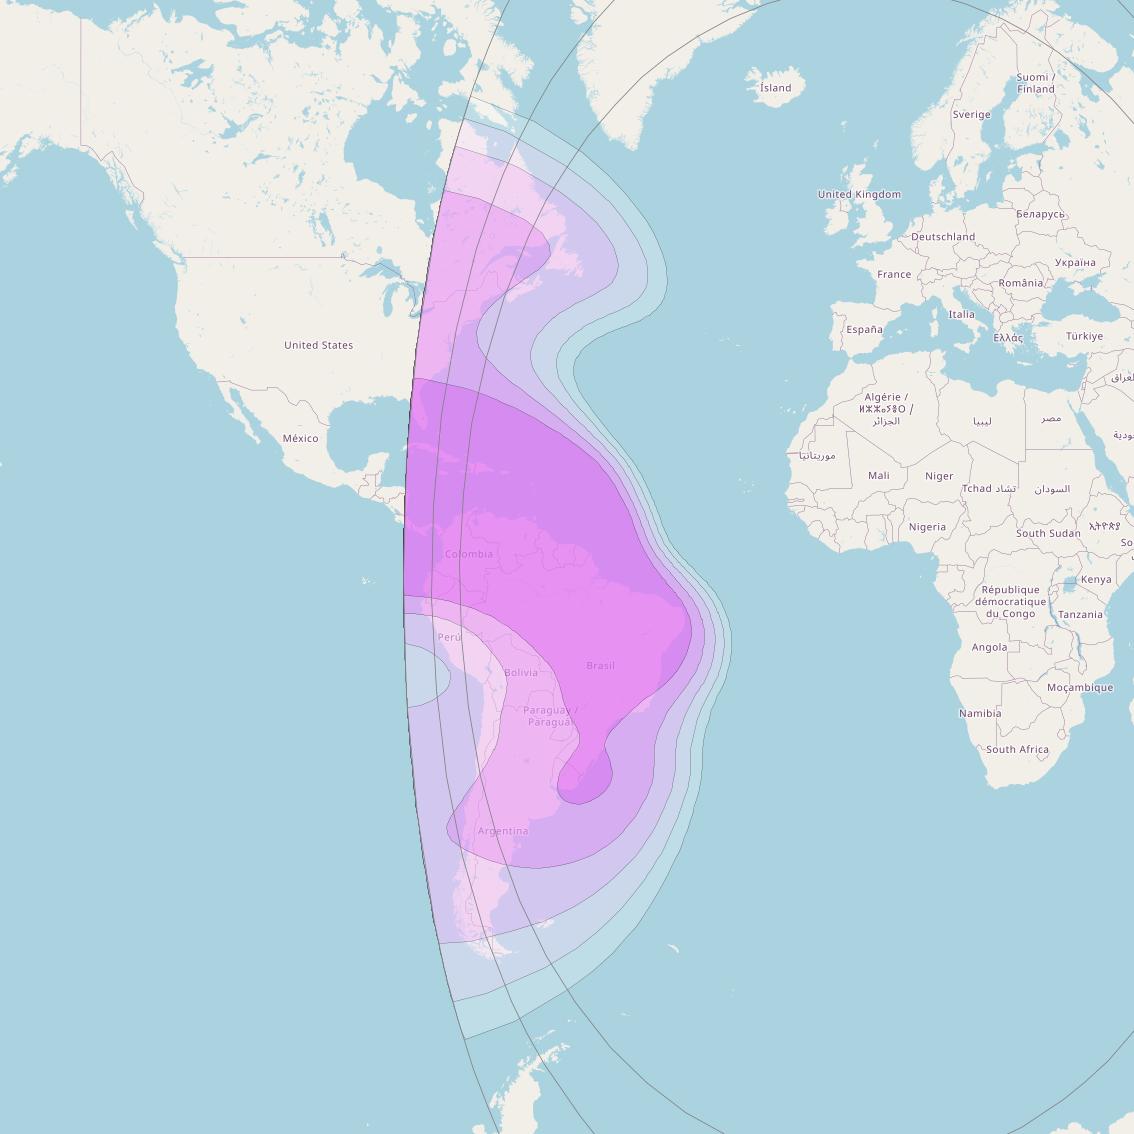 ABS-3A at 3° W downlink C-band West Hemi beam coverage map